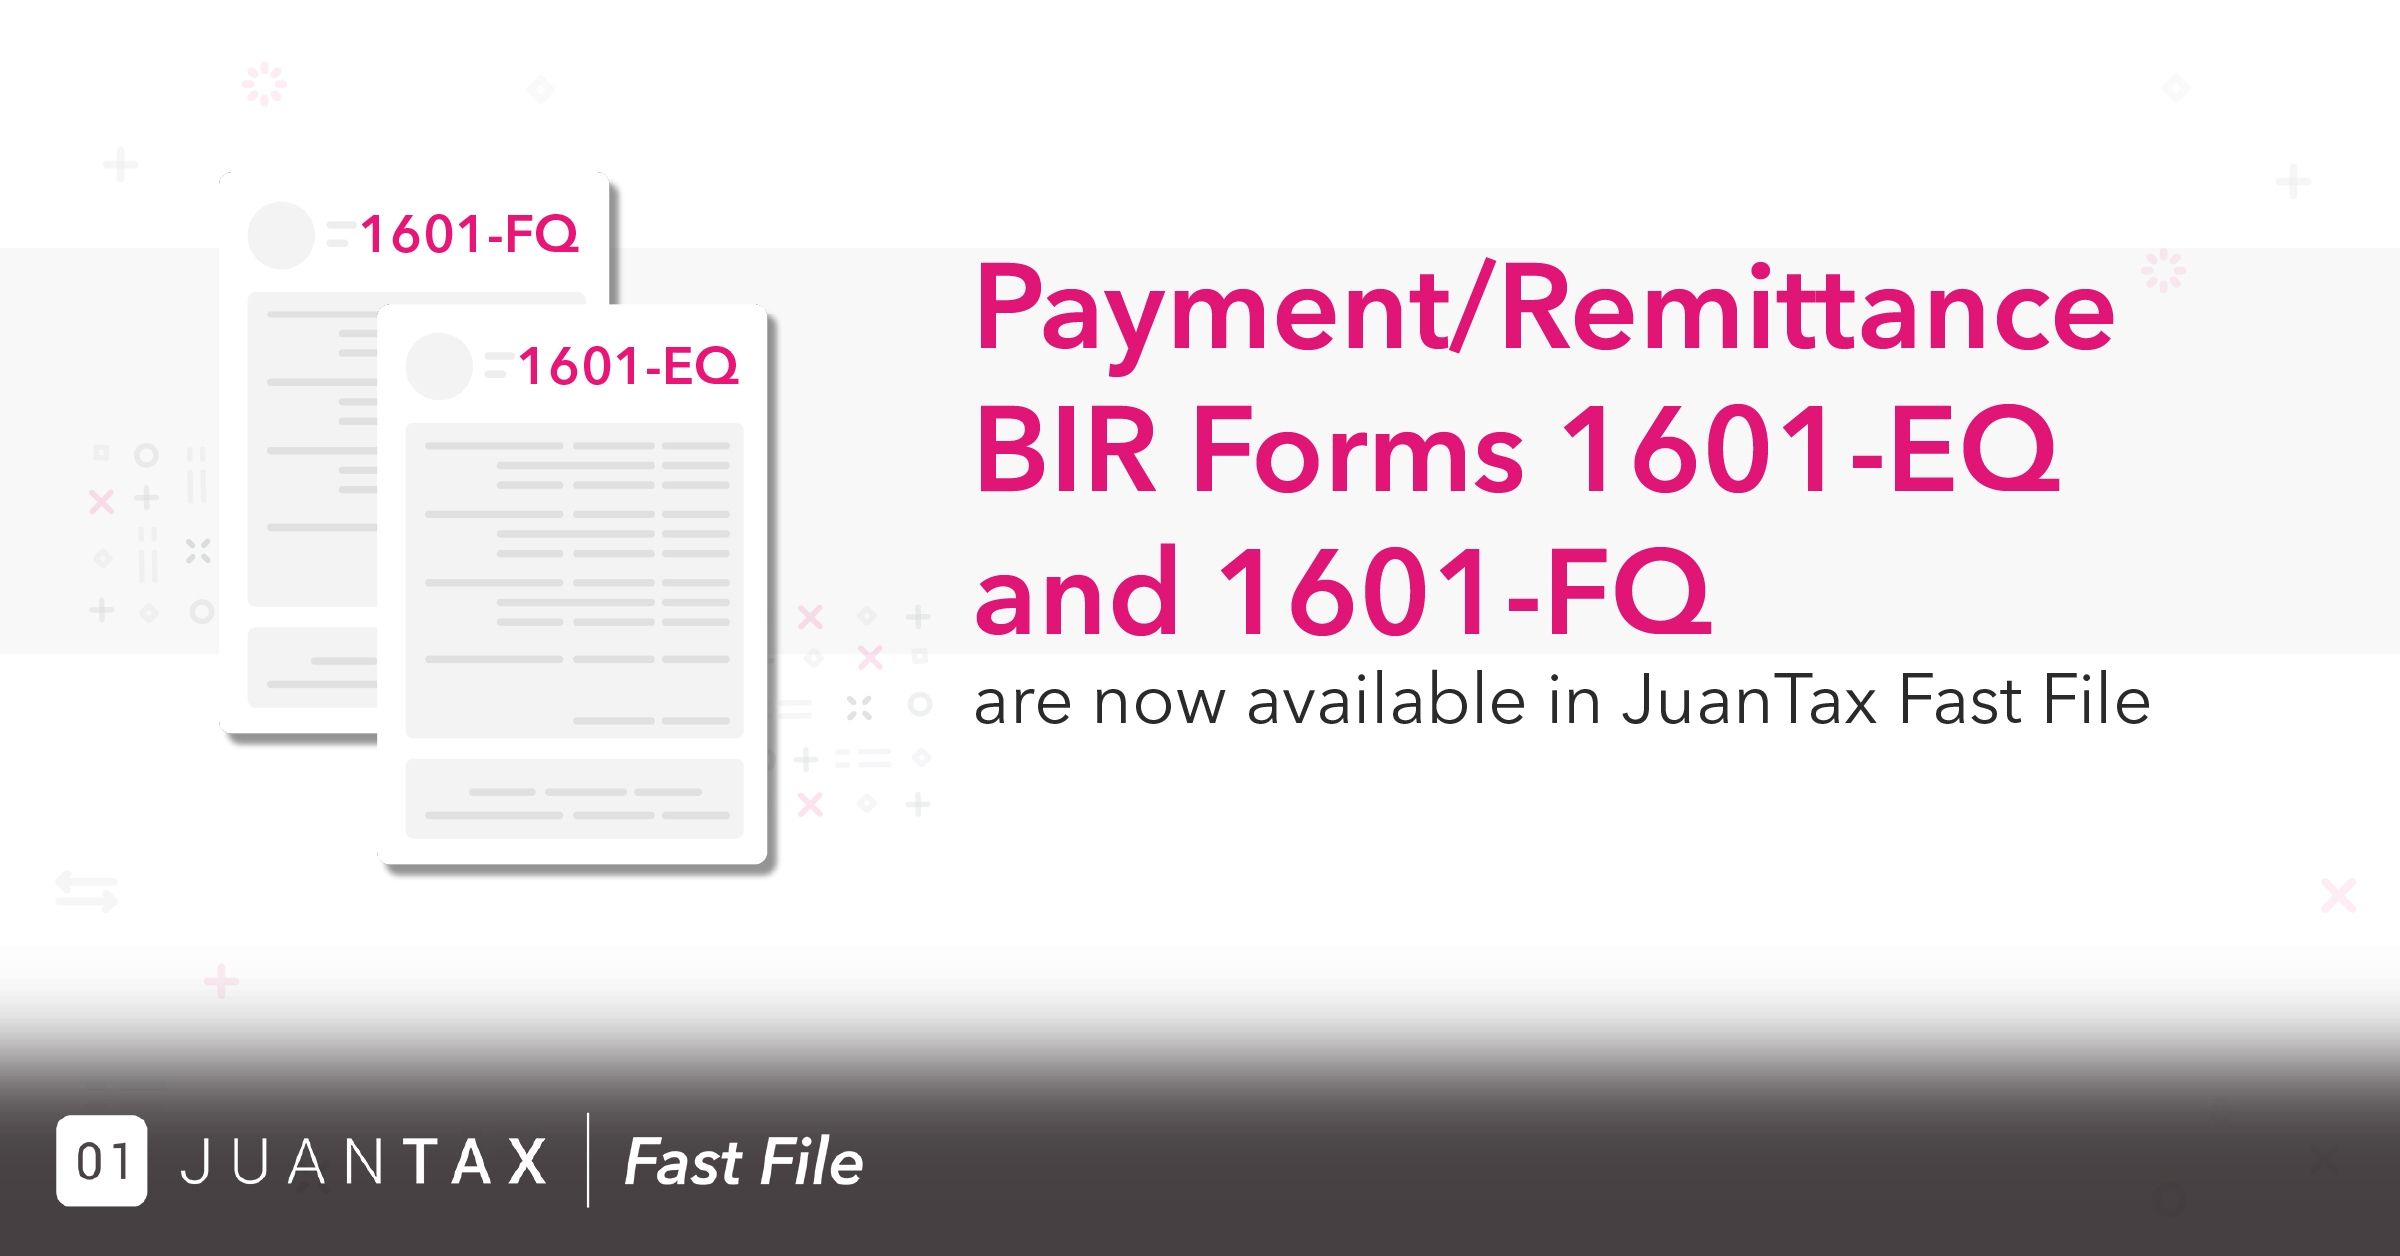 Payment/Remittance BIR Forms 1601-EQ and 1601-FQ